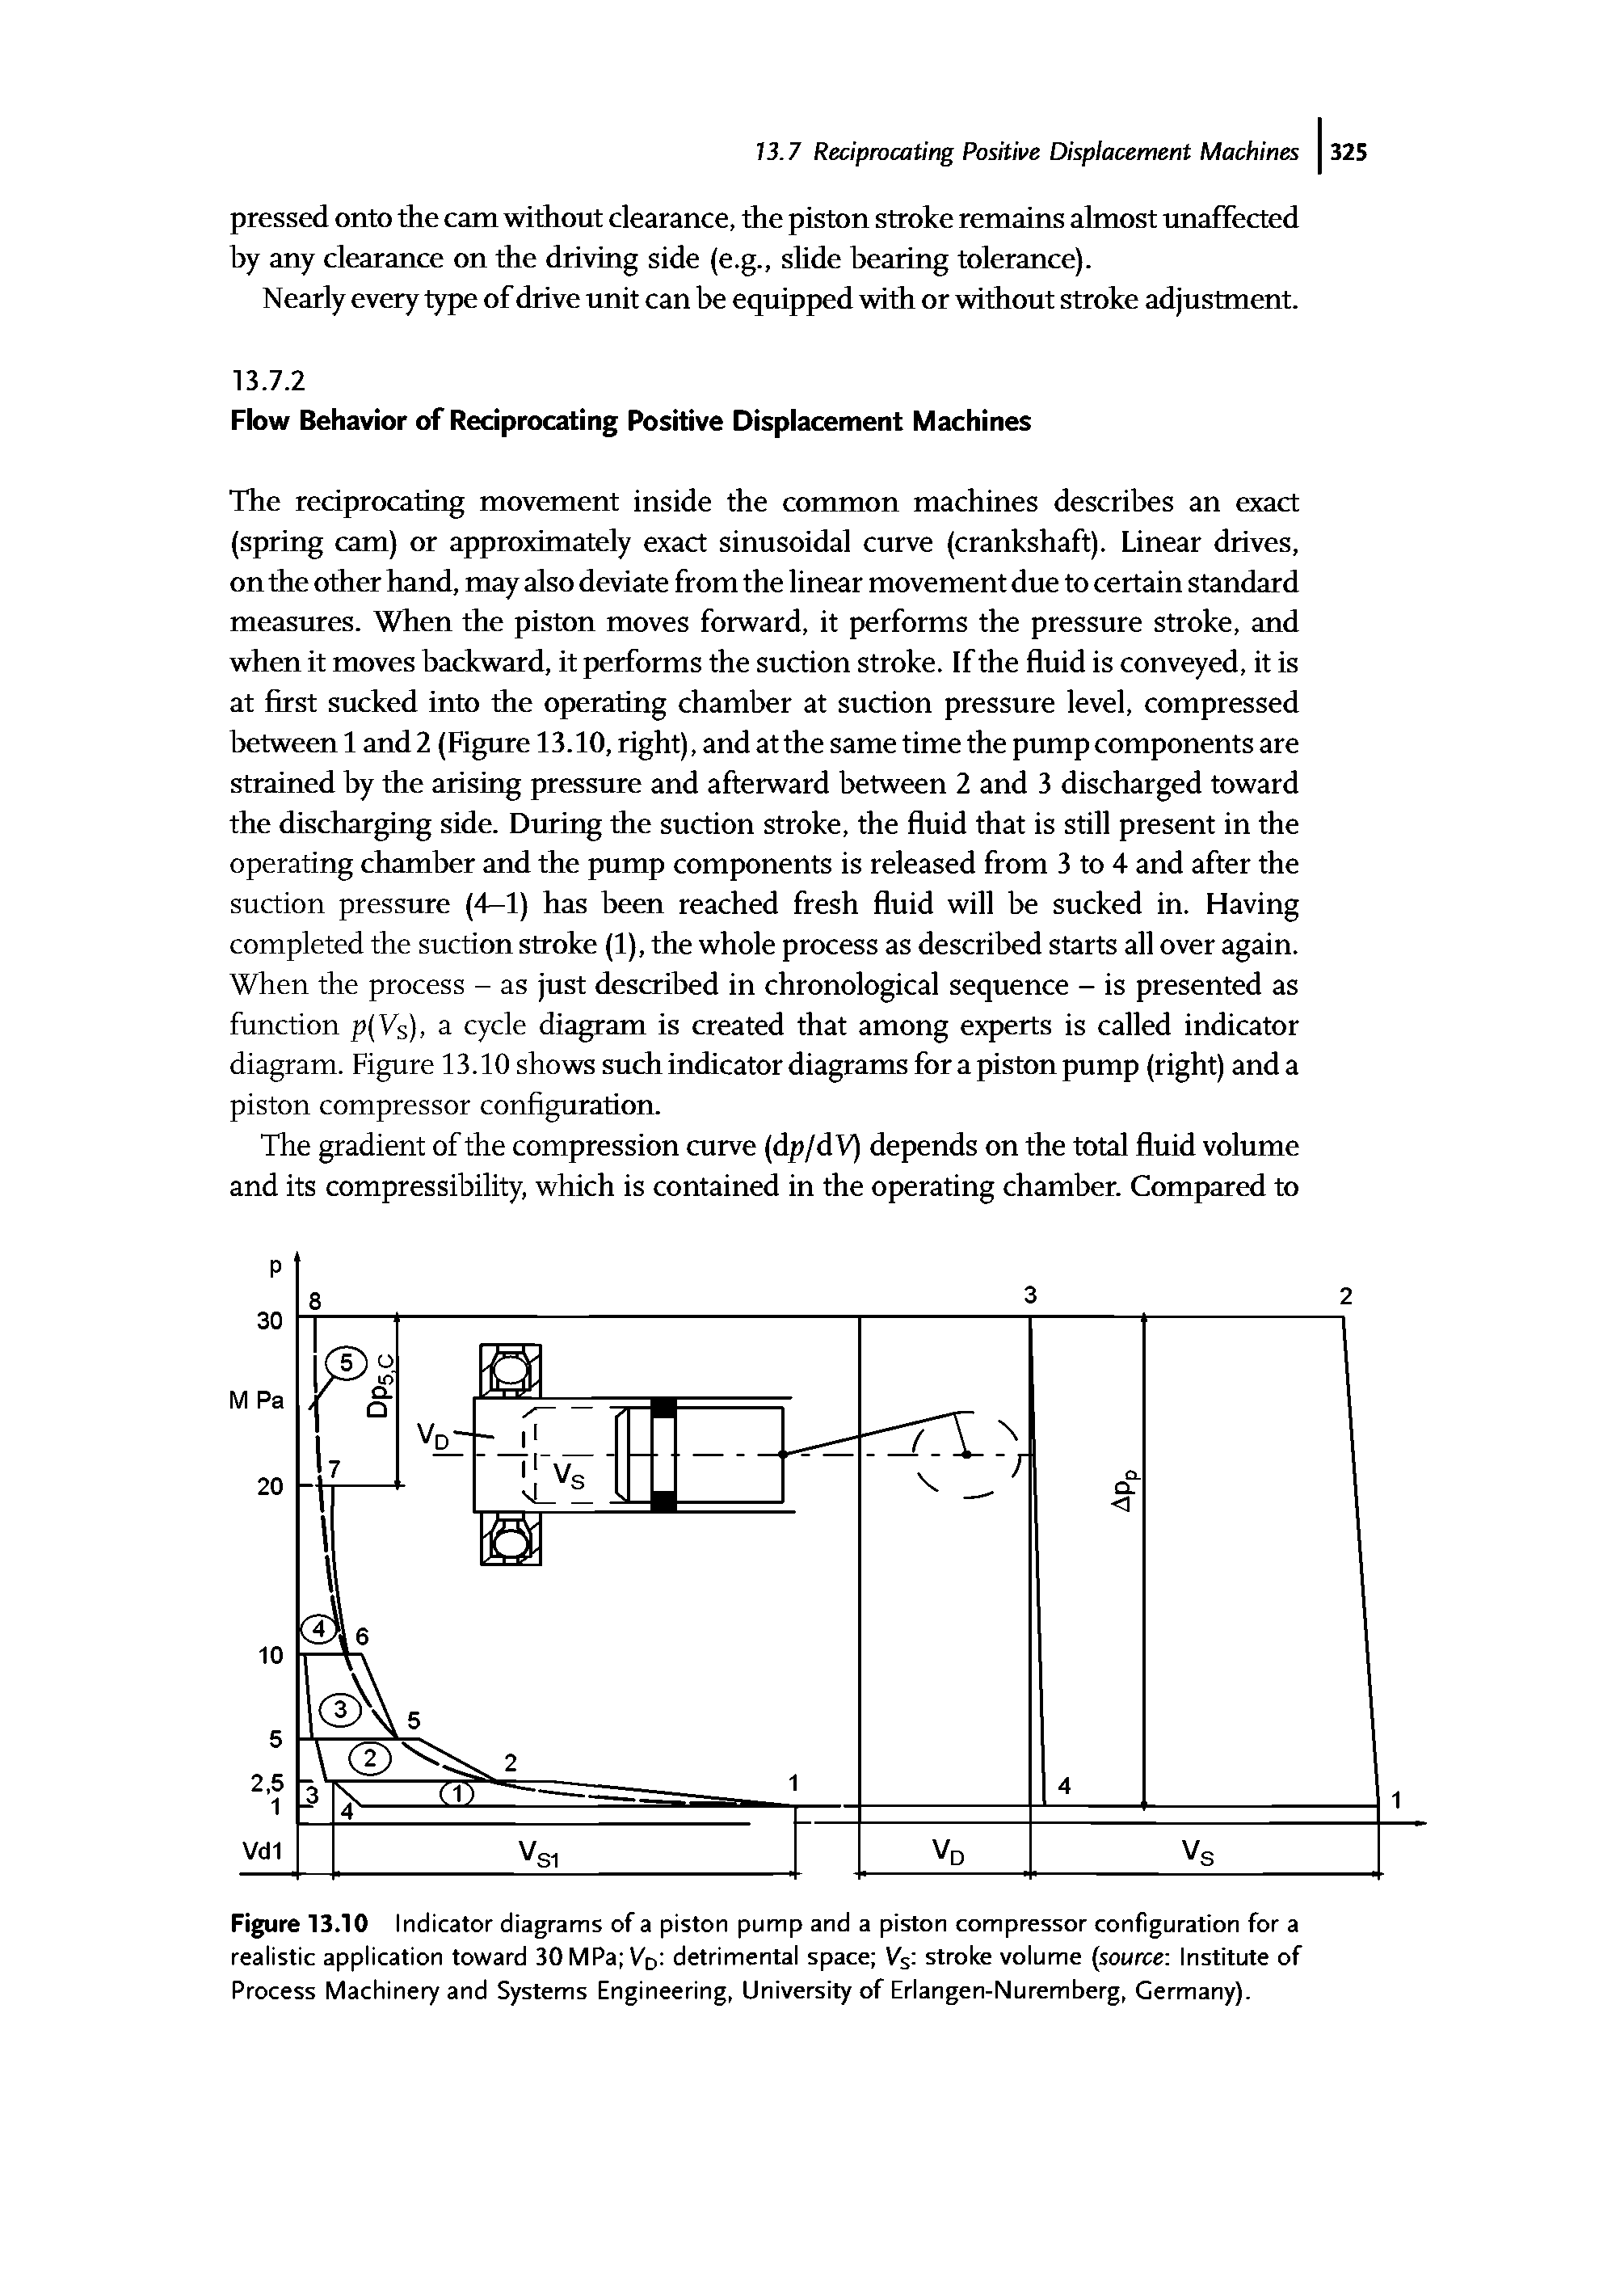 Figure 13.10 Indicator diagrams of a piston pump and a piston compressor configuration for a realistic application toward 30MPa Vd detrimental space Vs stroke volume source Institute of Process Machinery and Systems Engineering, University of Erlangen-Nuremberg, Germany).